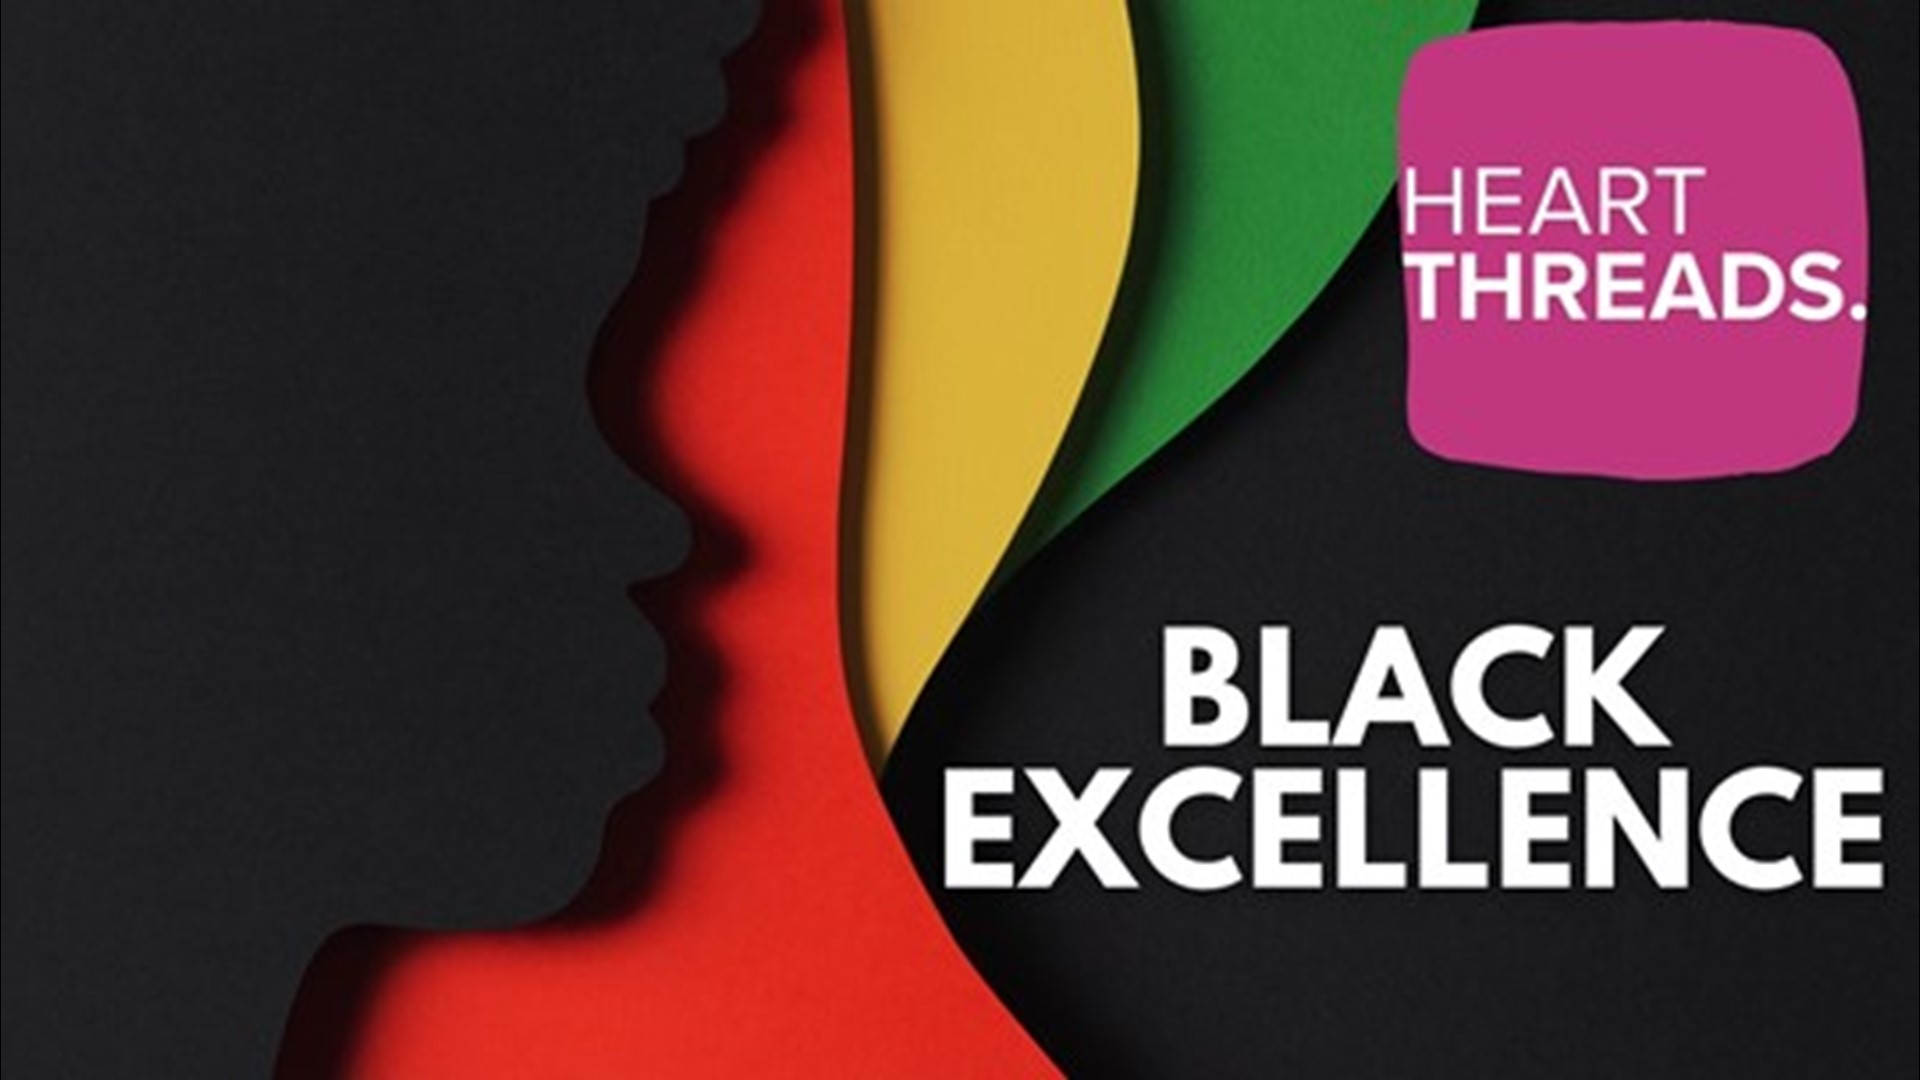 A collection of heartwarming stories showcasing the successes and achievements of those within the Black community as we celebrate Black History Month.